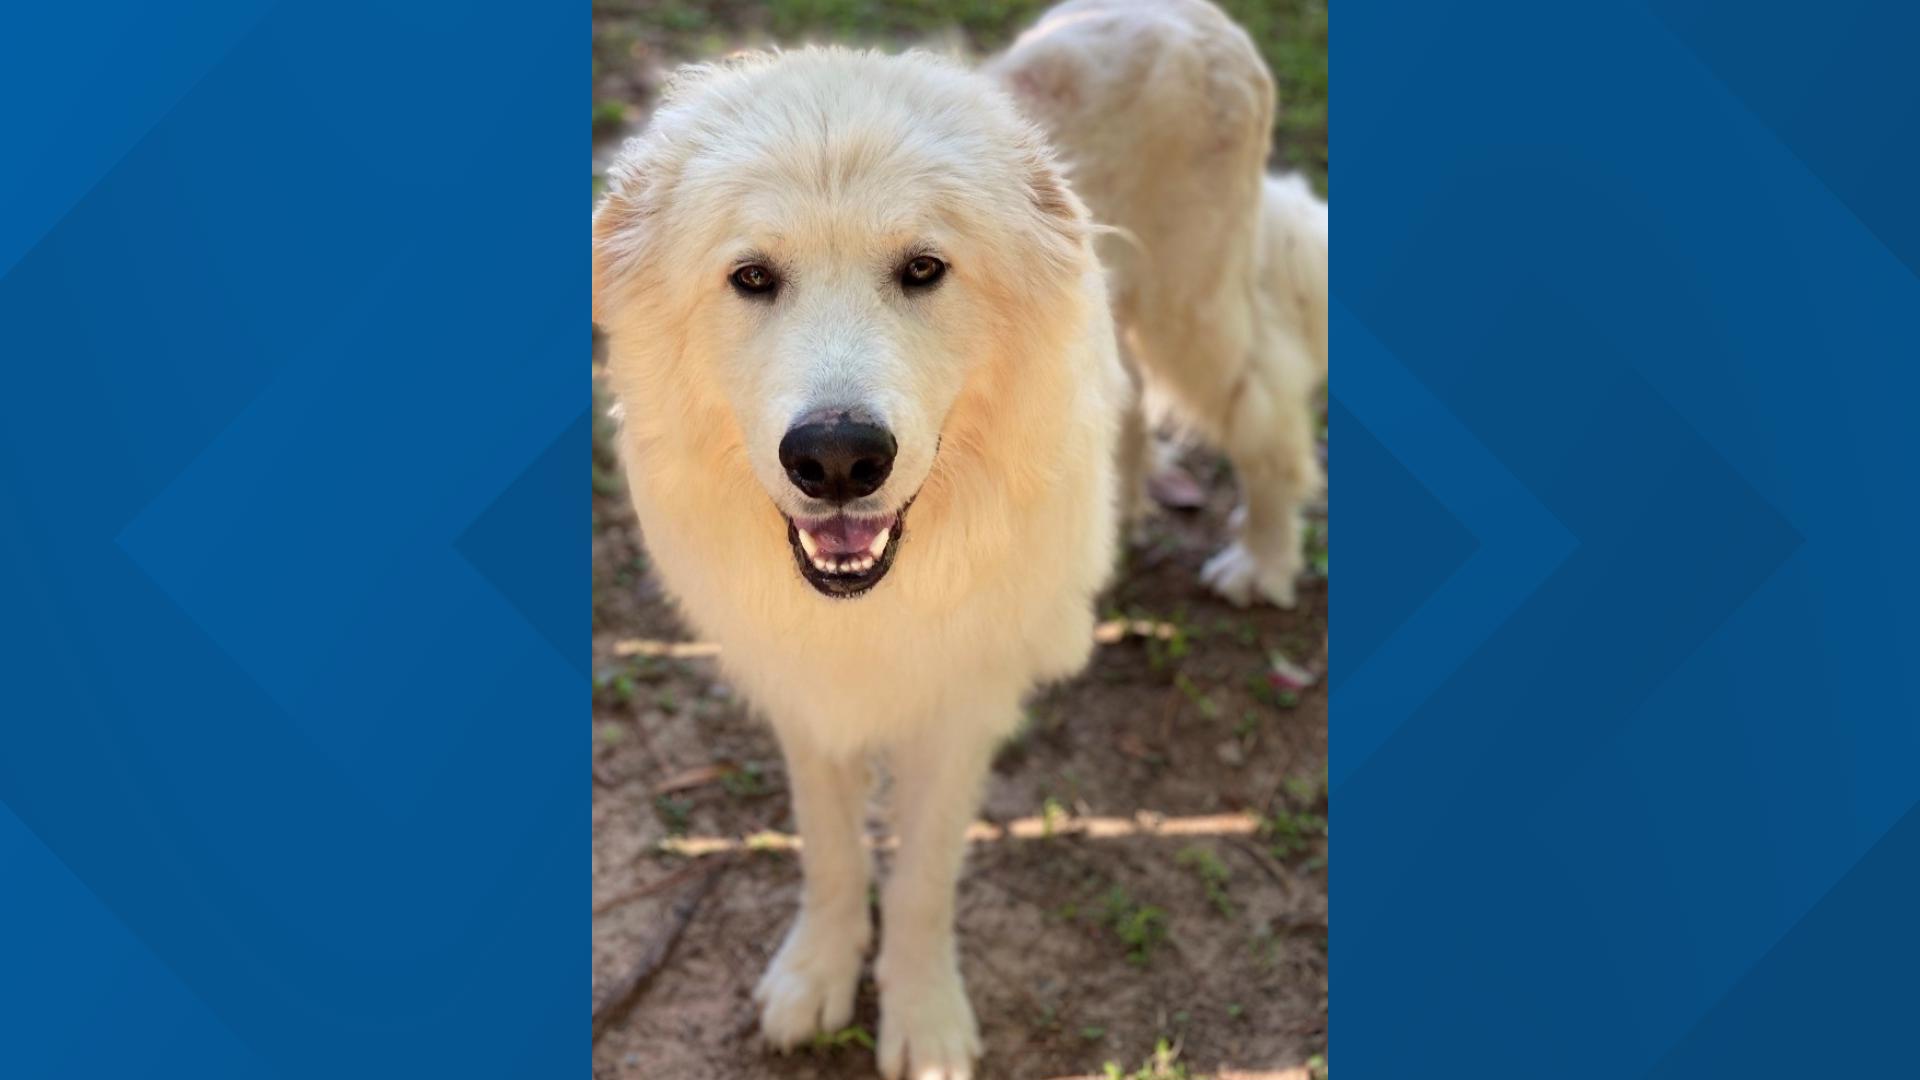 Flurry is a Great Pyrenees who's about 3 years old. He had some skin issues, but those have cleared up and now he just needs a best friend to call his own!